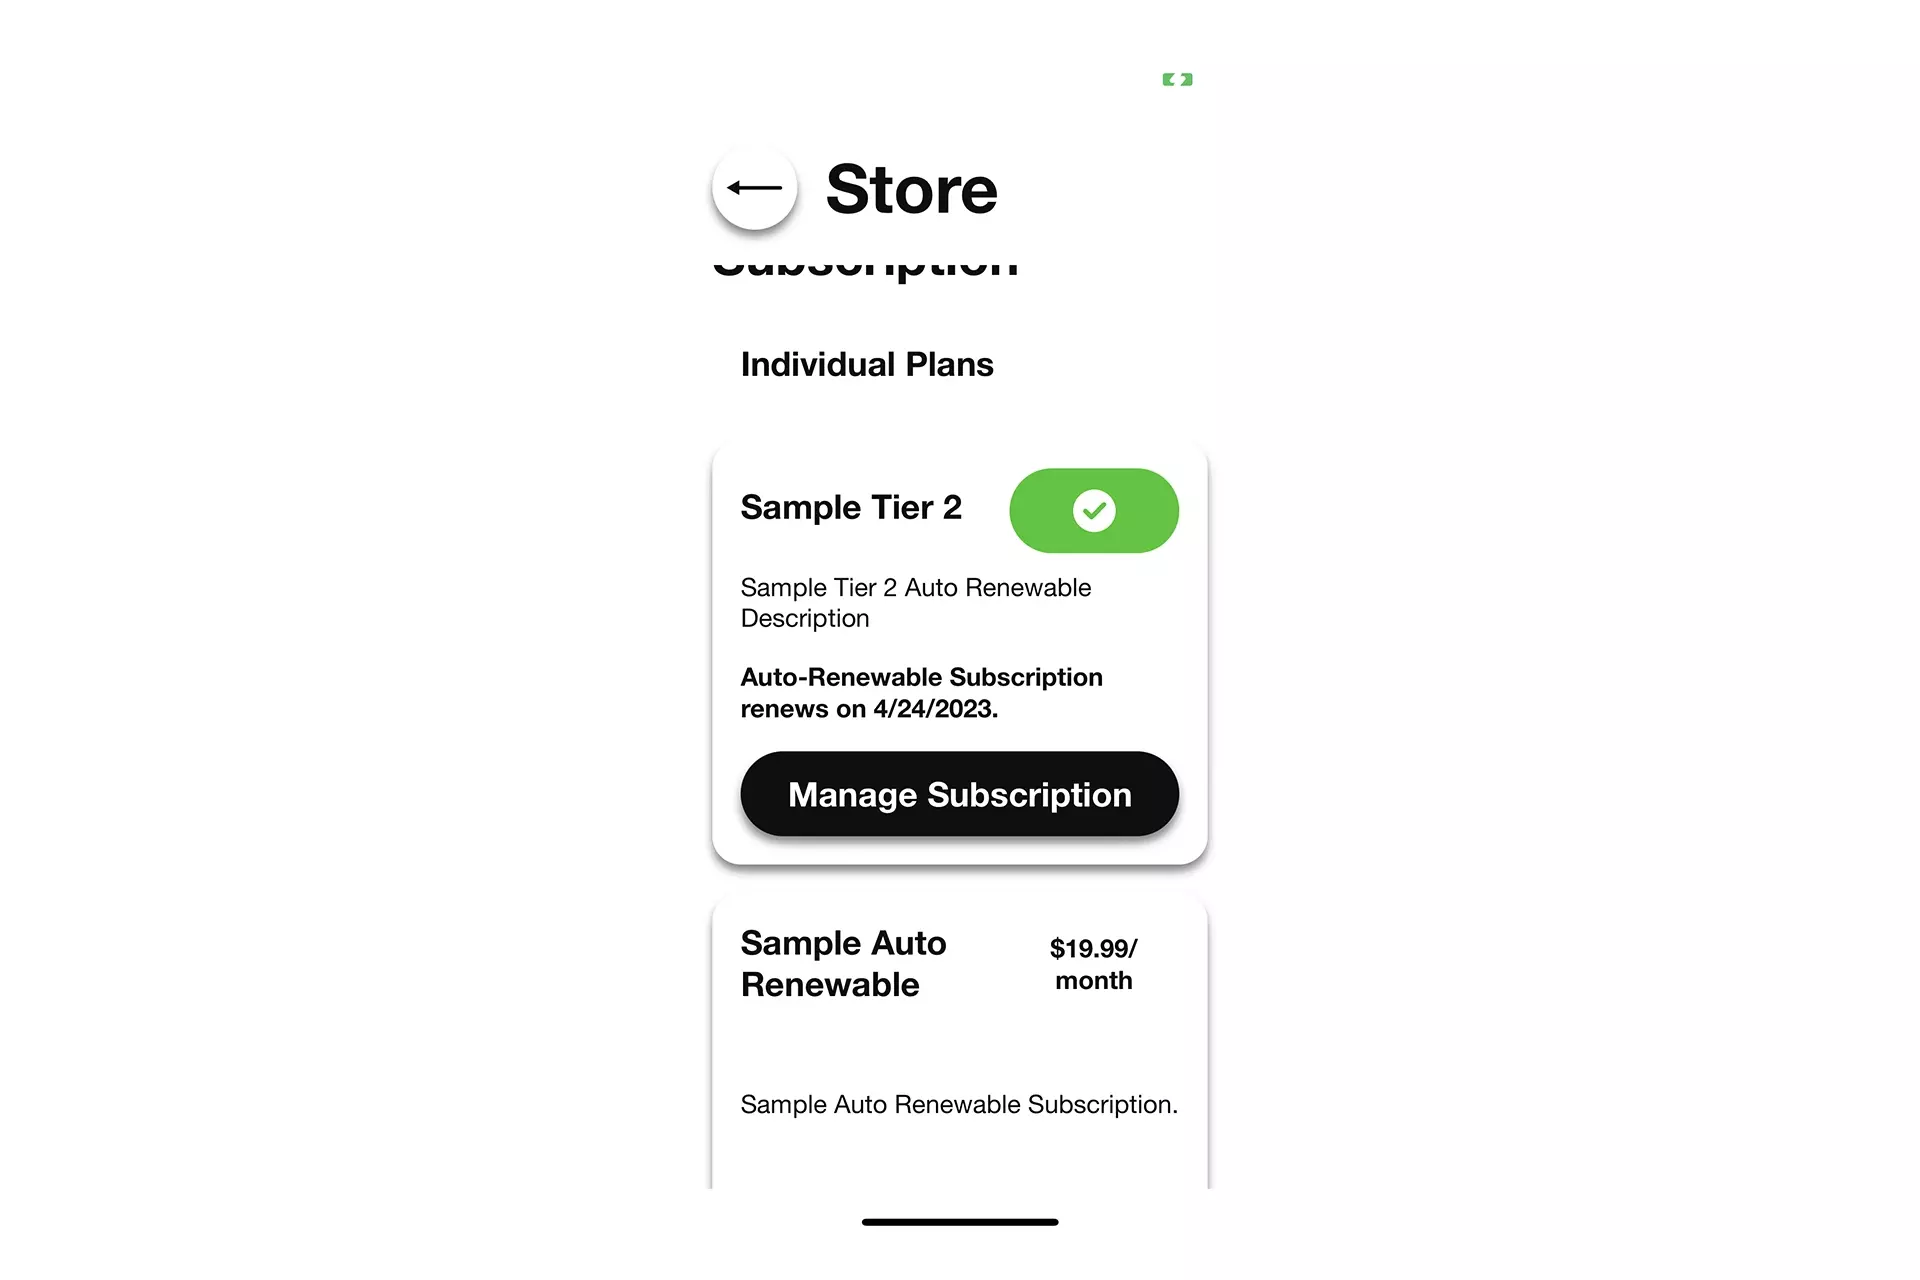 A screenshot of an iOS app showing a completed purchase.